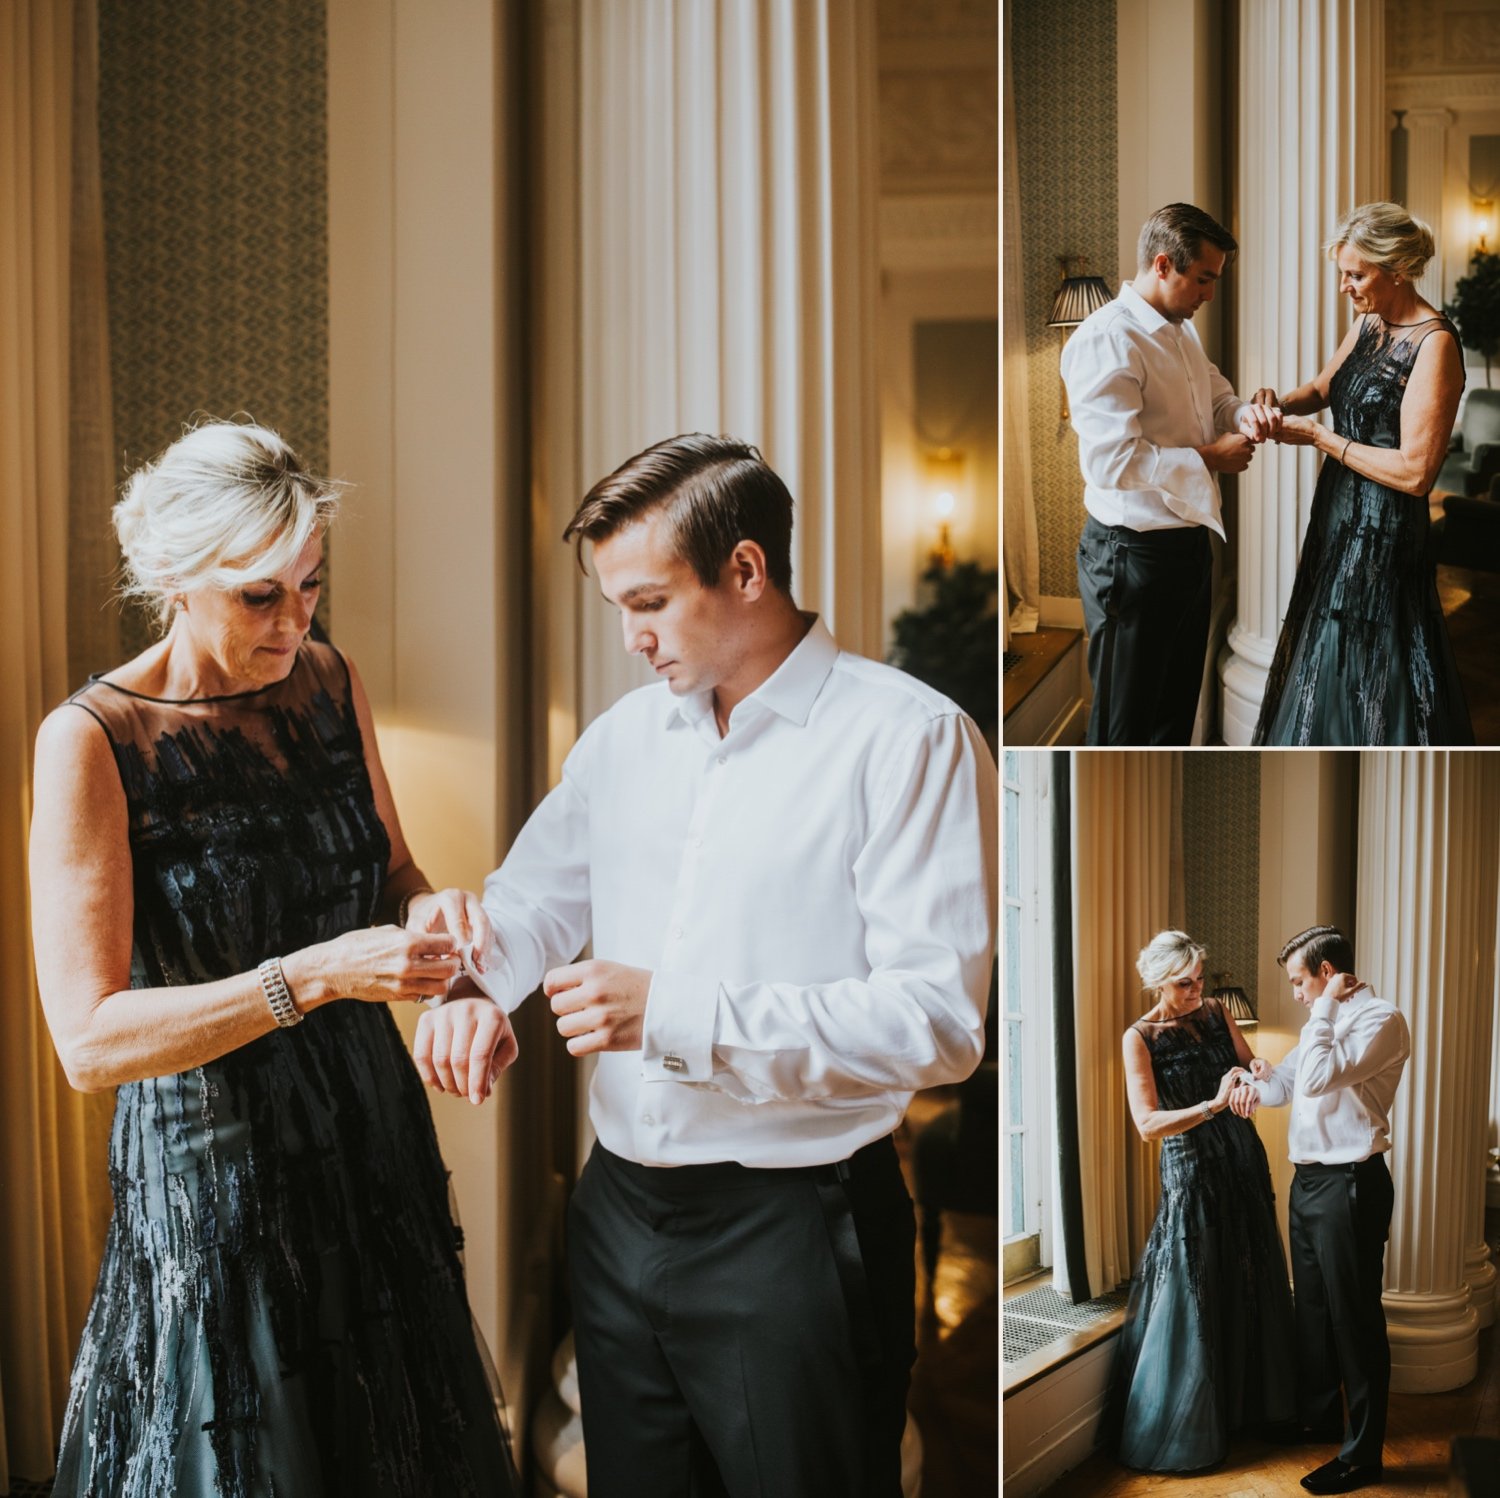 Hudson Valley Wedding Photographer, The Foundry LIC Wedding, The Foundry Wedding, Groom Getting Ready, The Yale Club